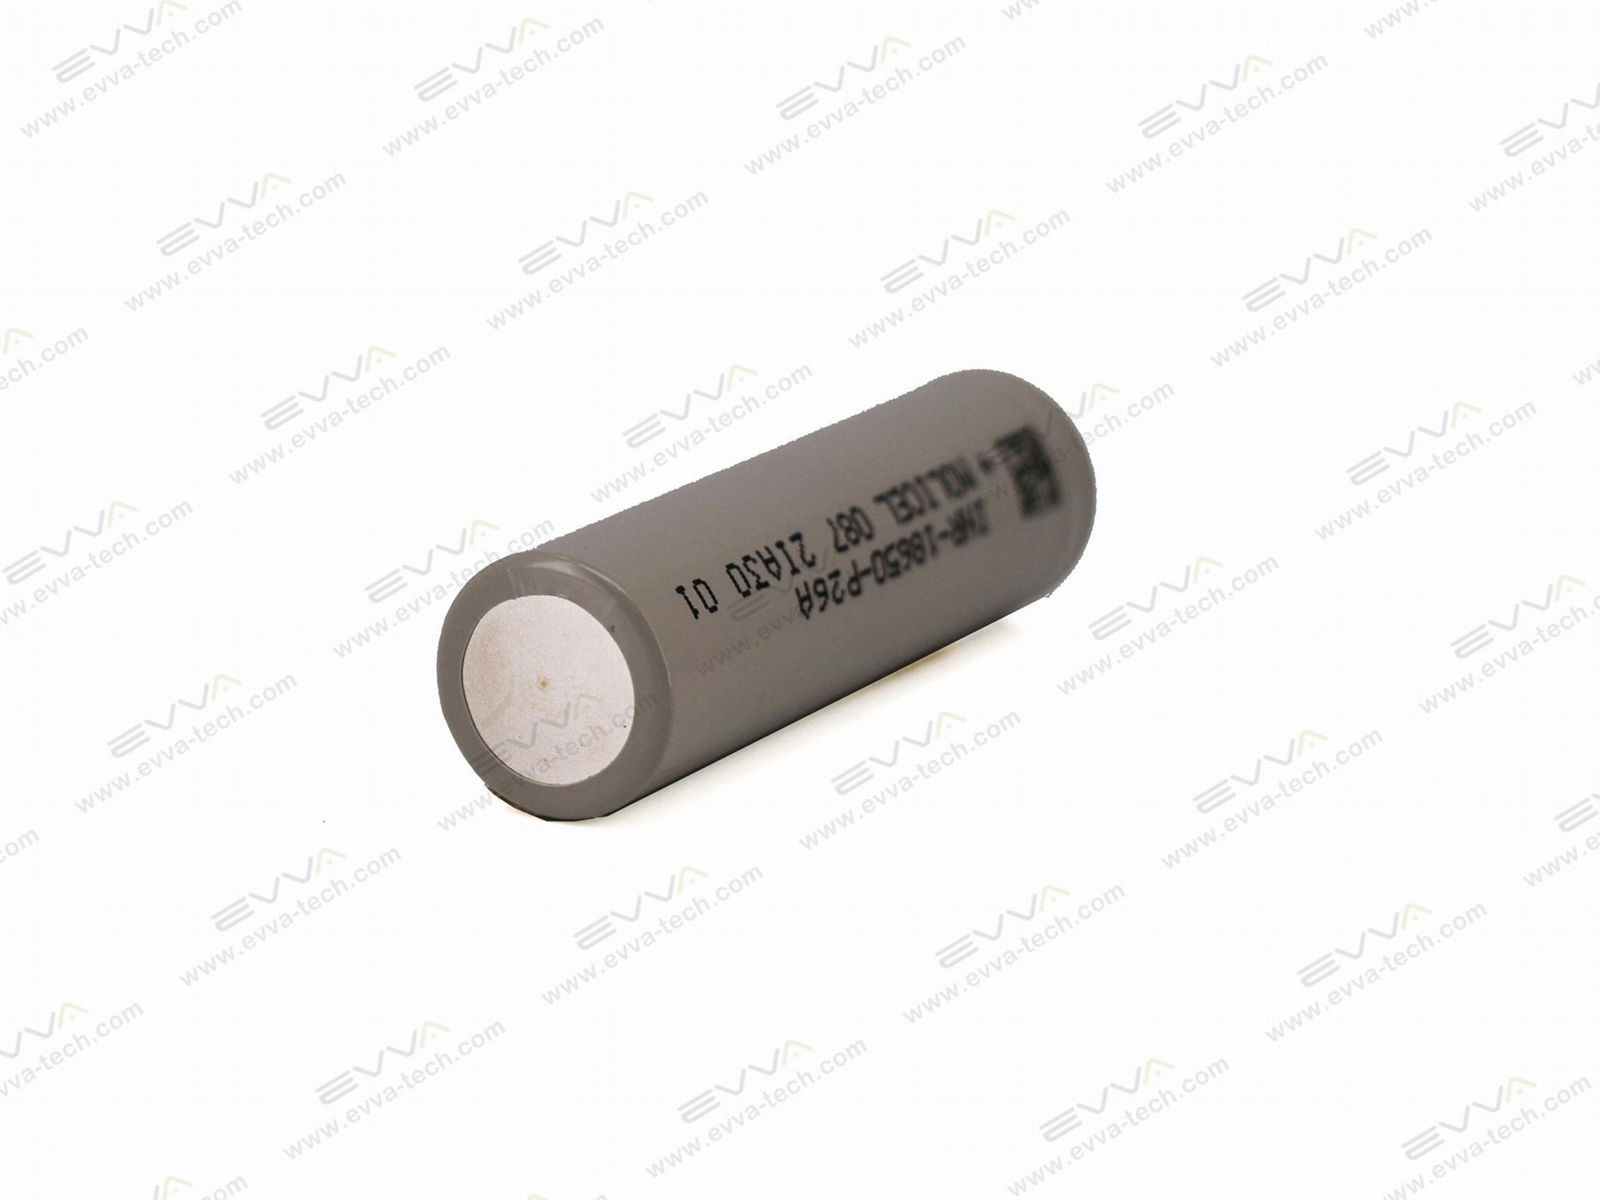 Molicel 18650 P26A 35A High drain Batteries INR18650-P26A for UAV/ DRONE 4